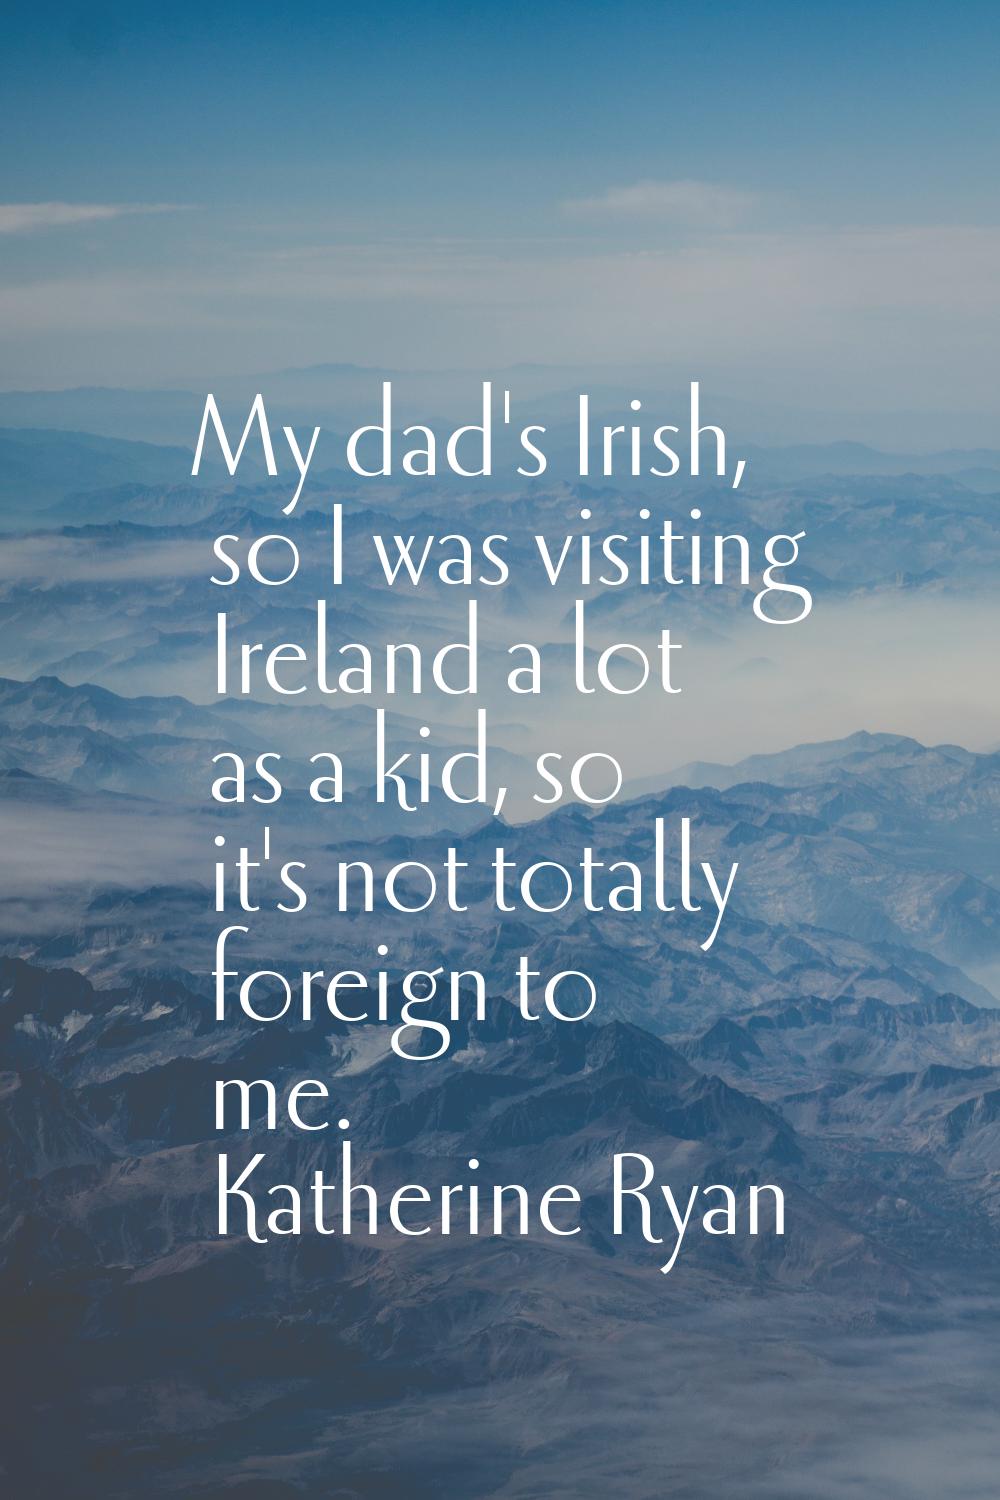 My dad's Irish, so I was visiting Ireland a lot as a kid, so it's not totally foreign to me.